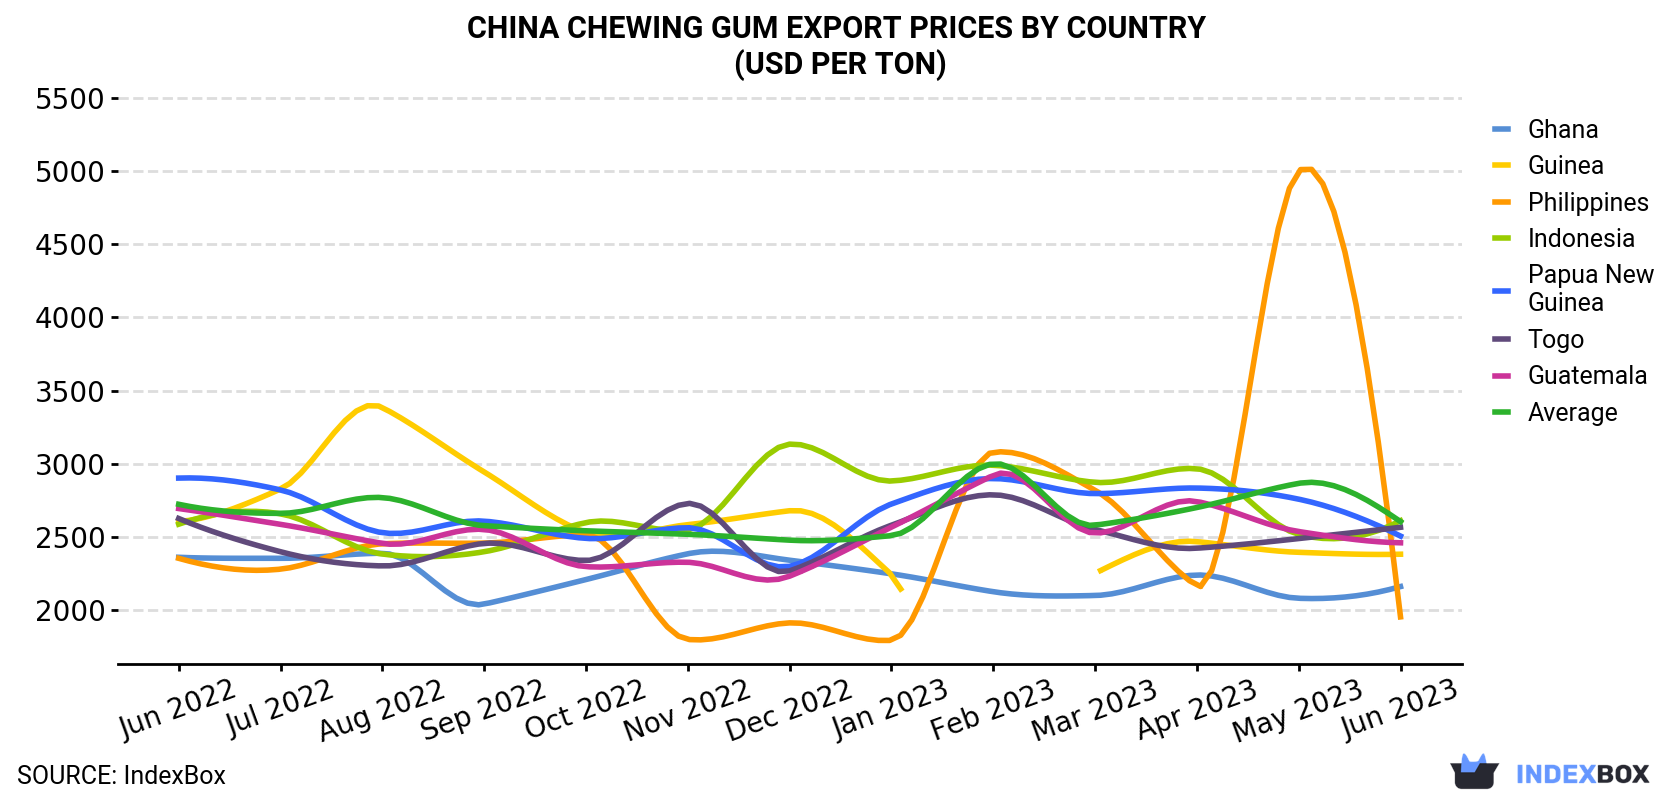 China Chewing Gum Export Prices By Country (USD Per Ton)